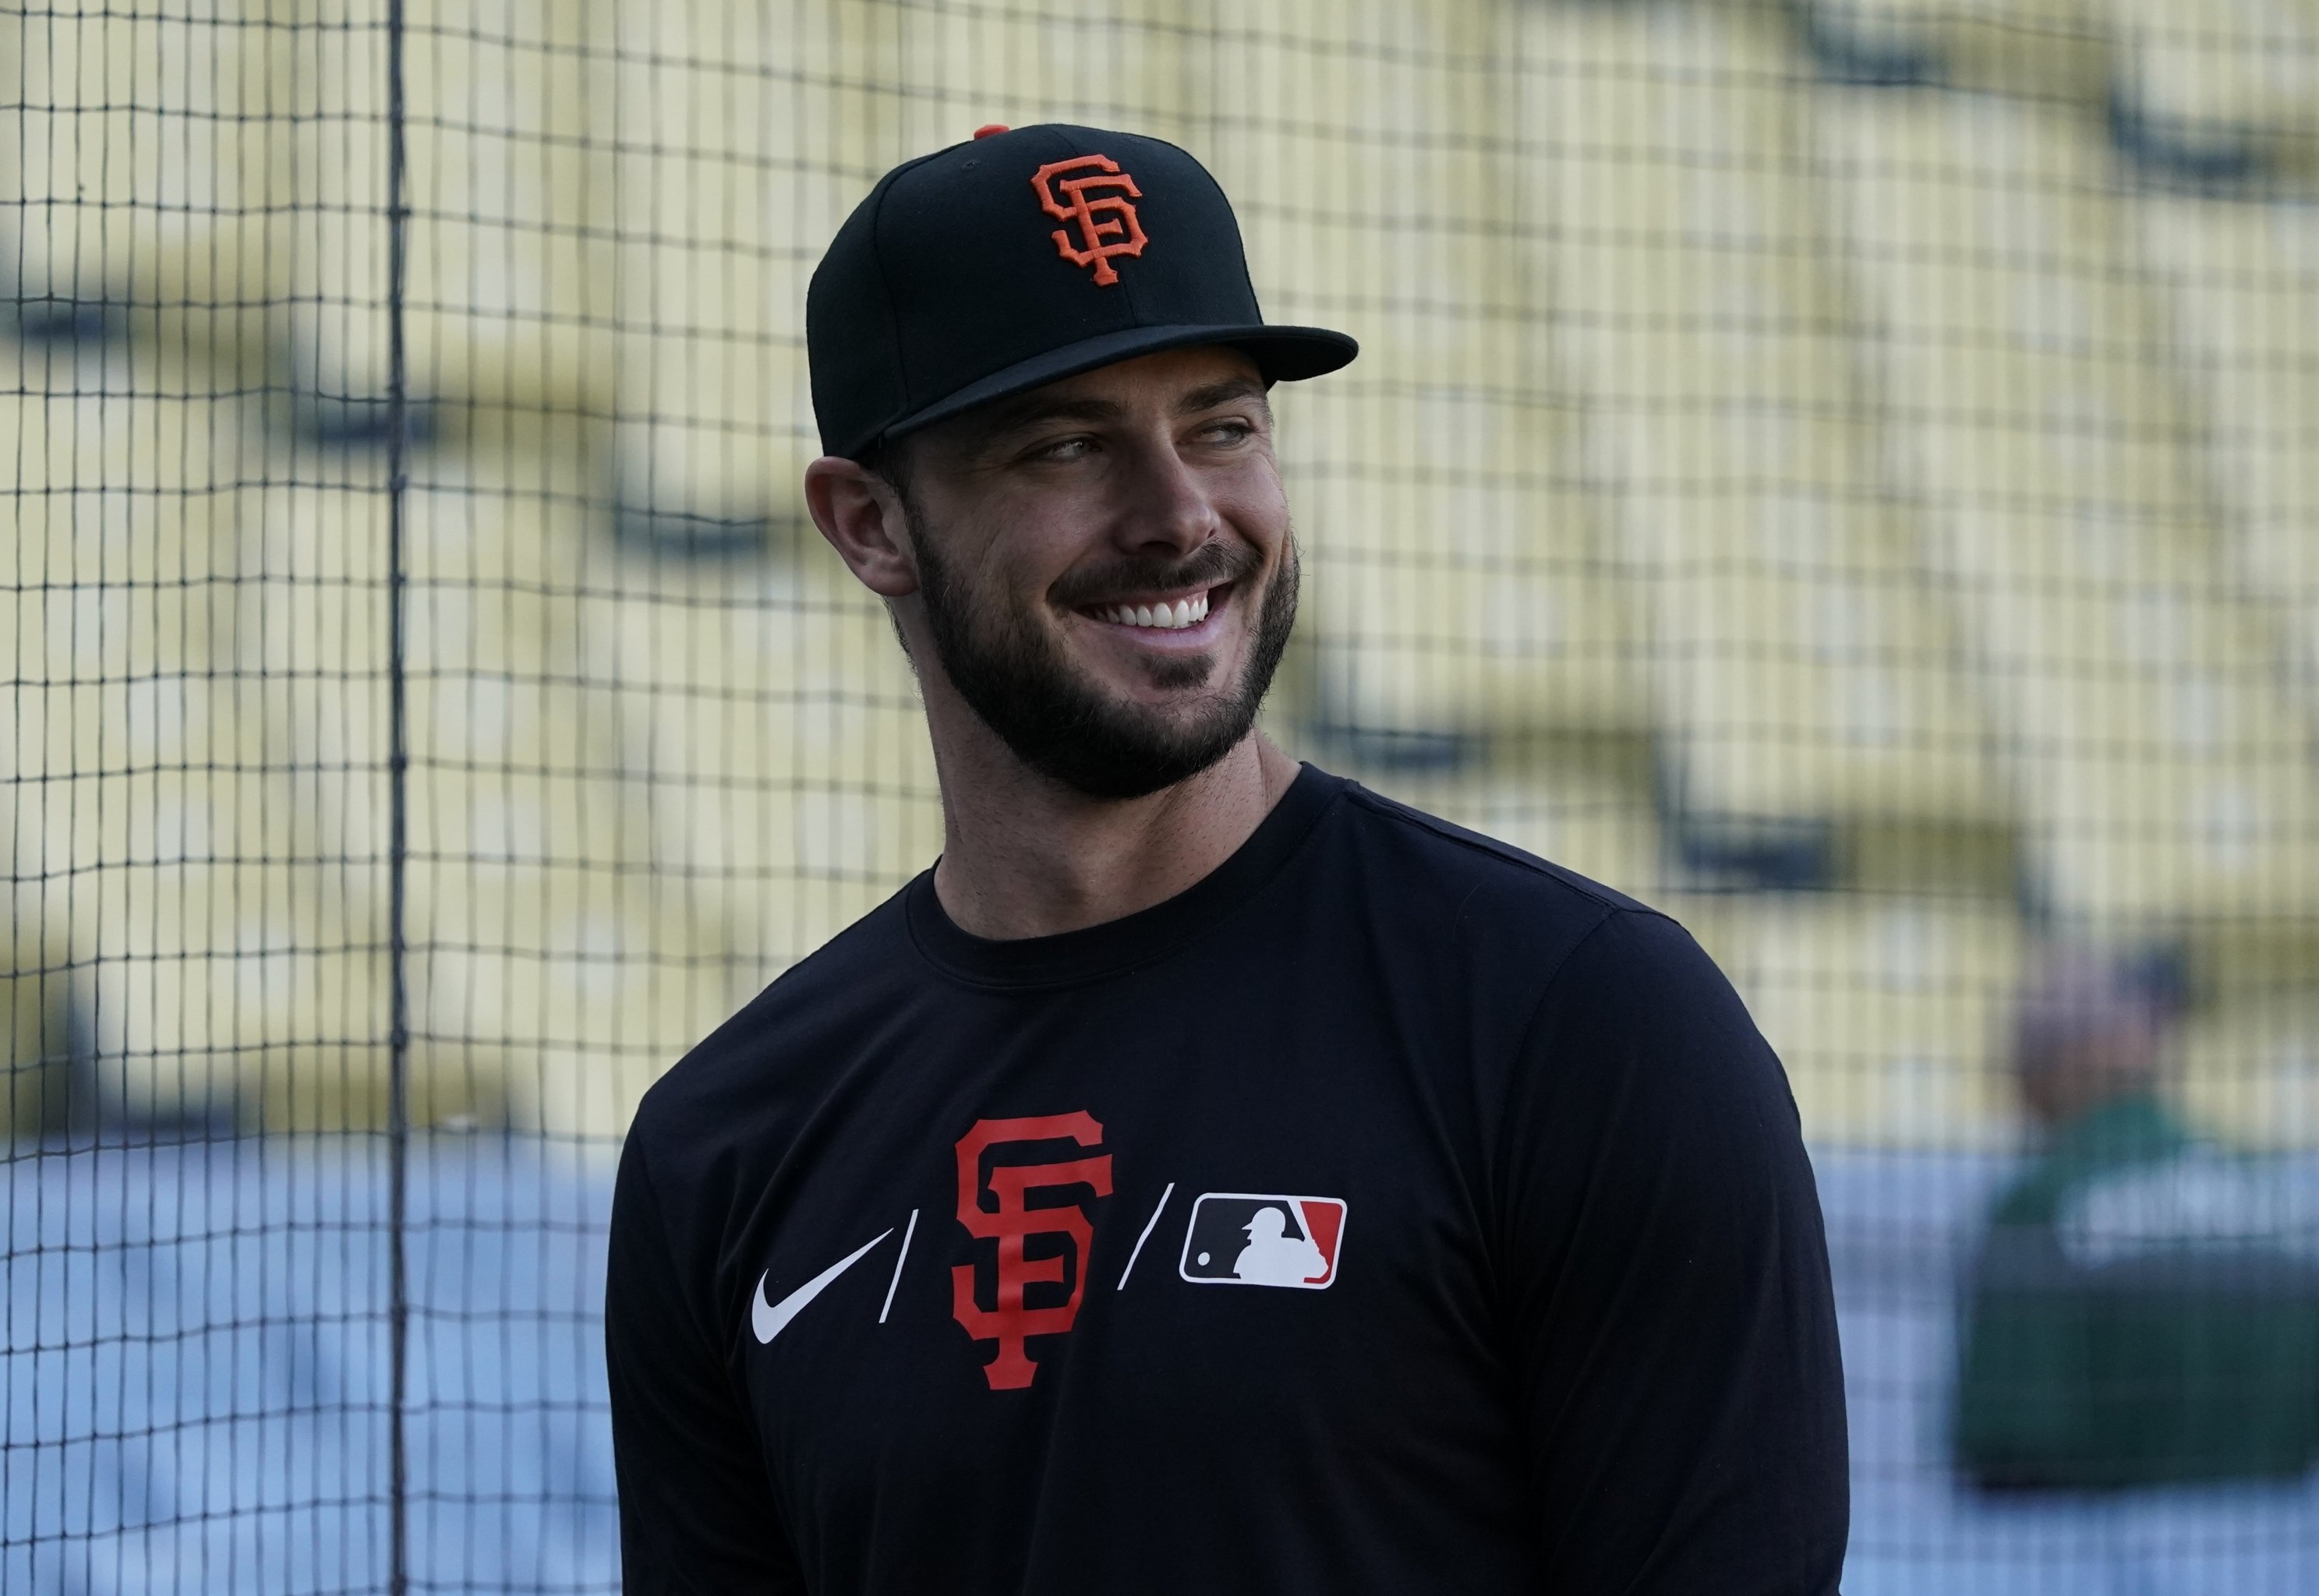 Cubs: Big things stand in the way of a Kris Bryant reunion